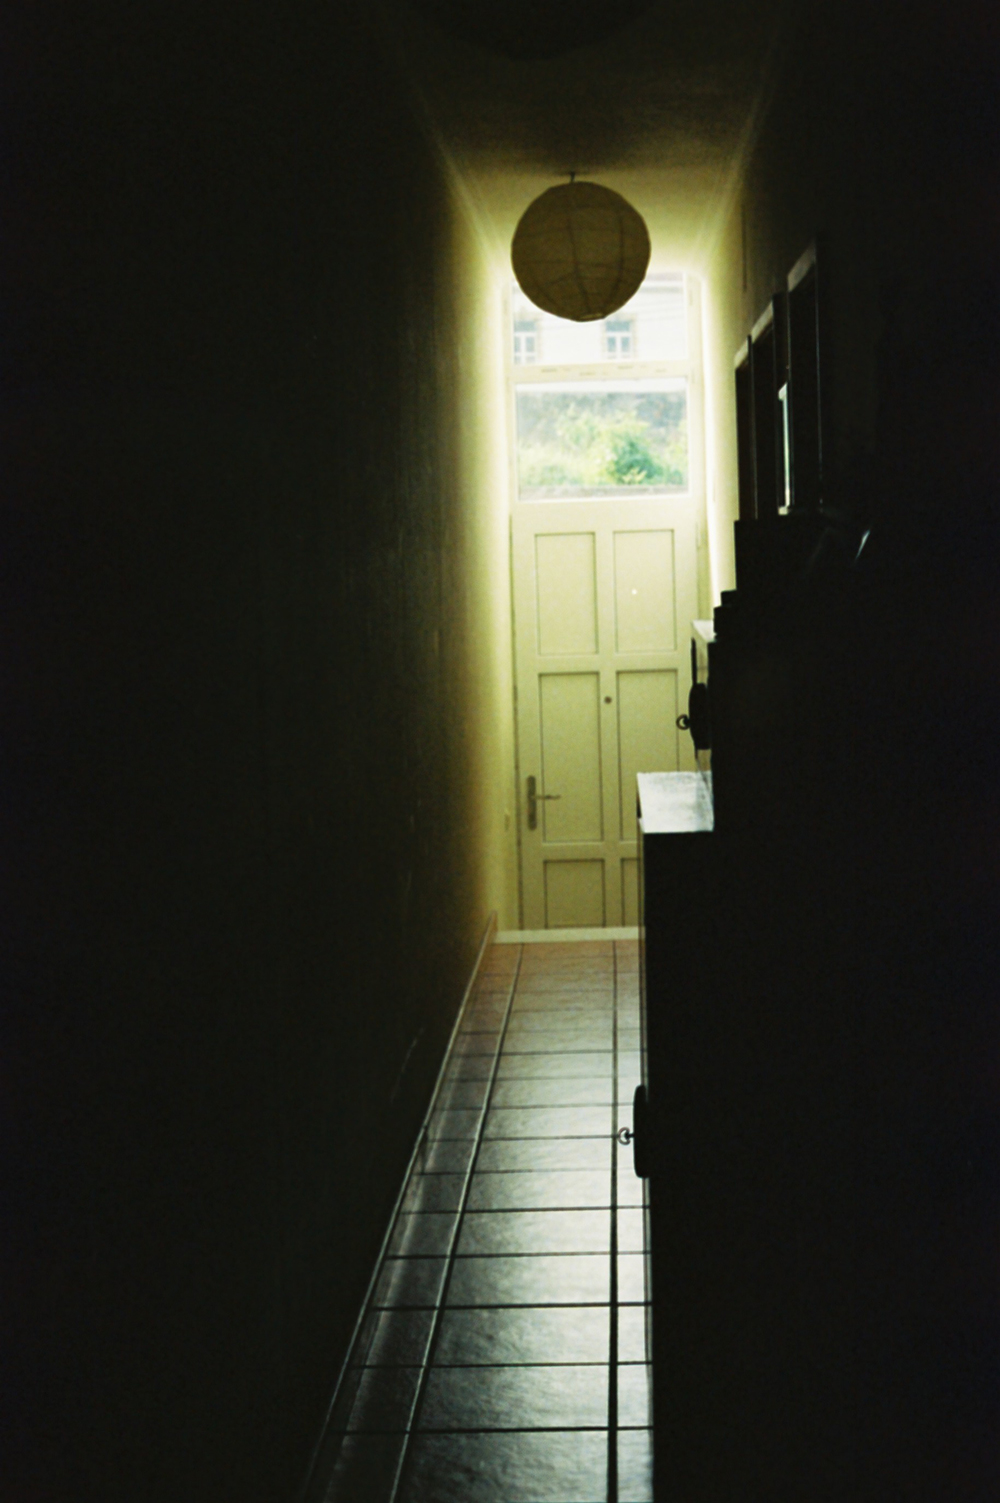 Analog photo of a long, dark and narrow hallway, with light coming from a small window at the end.